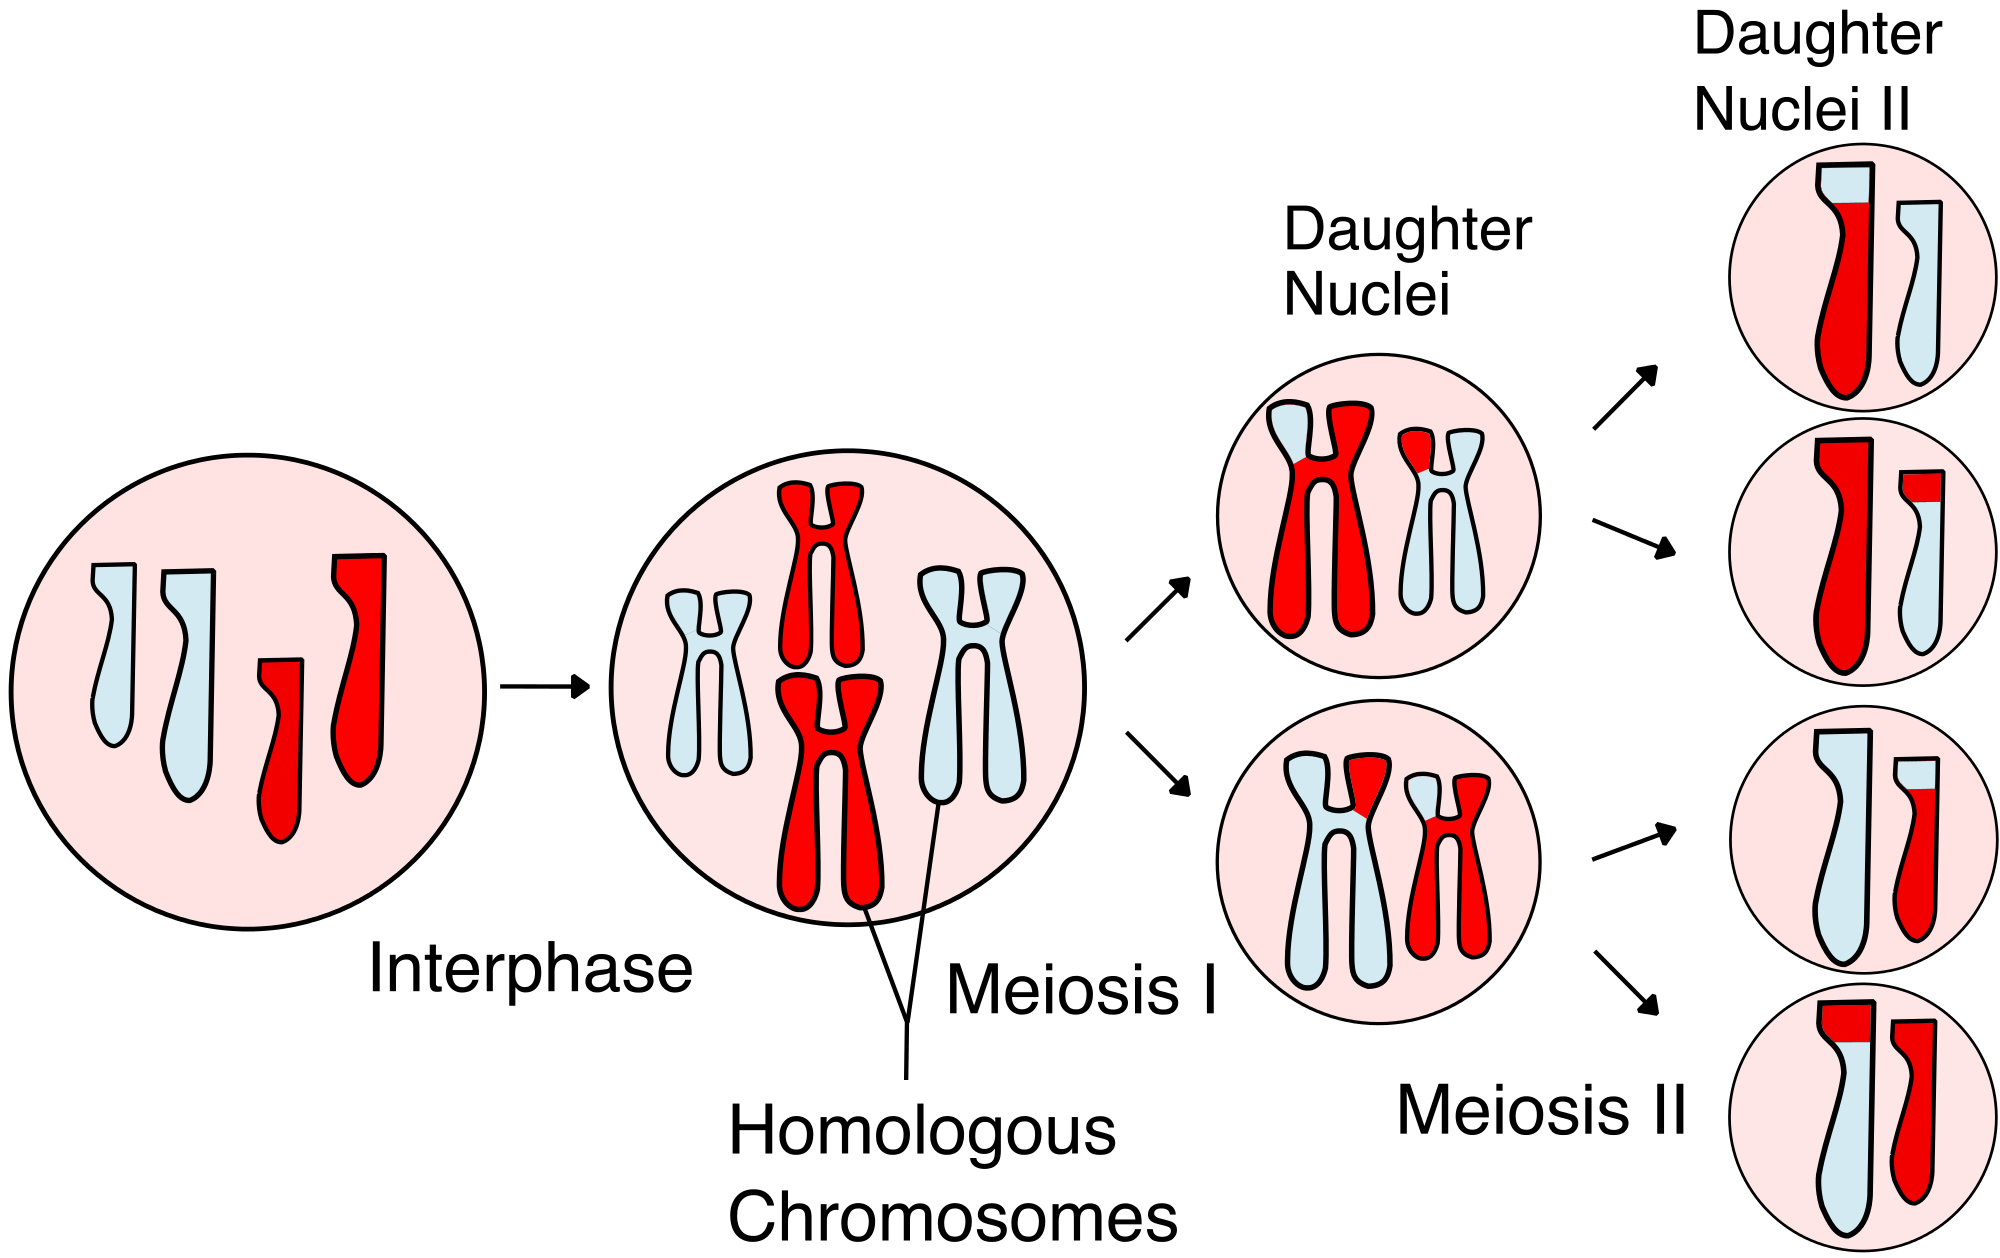 which diagram represents anaphase i of meiosis